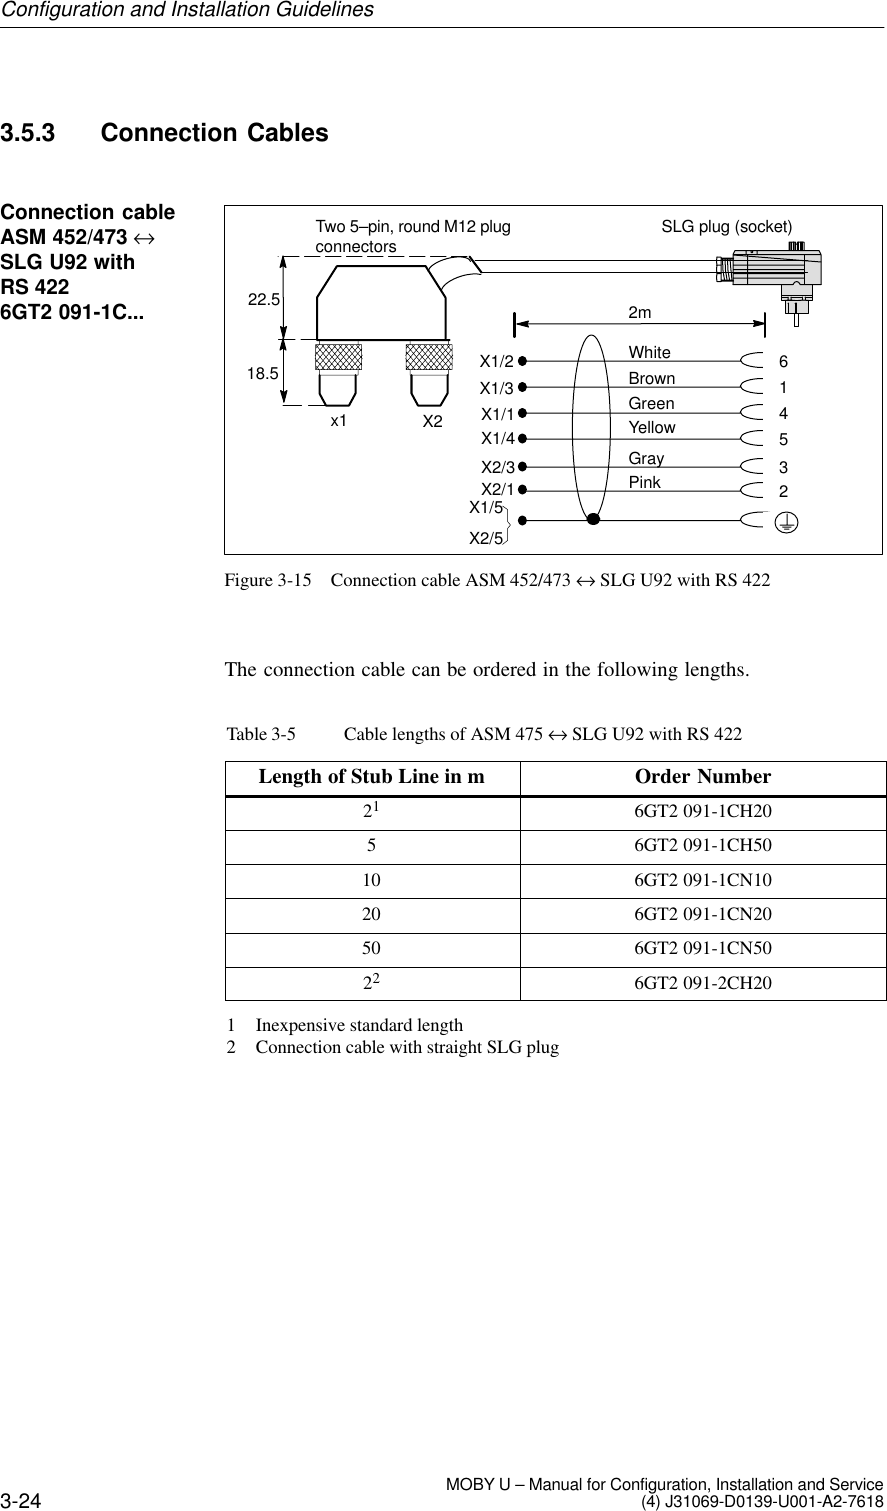 3-24 MOBY U – Manual for Configuration, Installation and Service(4) J31069-D0139-U001-A2-76183.5.3 Connection Cables614532Two 5–pin, round M12 plugconnectorsX1/2X1/3X1/1X1/4X2/3X2/1X1/5X2/5x1 X2WhiteBrownGreenYellowGrayPinkSLG plug (socket)2m22.518.5Figure 3-15 Connection cable ASM 452/473 ↔ SLG U92 with RS 422The connection cable can be ordered in the following lengths.Table 3-5 Cable lengths of ASM 475 ↔SLG U92 with RS 422Length of Stub Line in m Order Number216GT2 091-1CH2056GT2 091-1CH5010 6GT2 091-1CN1020 6GT2 091-1CN2050 6GT2 091-1CN50226GT2 091-2CH201 Inexpensive standard length2 Connection cable with straight SLG plugConnection cableASM 452/473 ↔SLG U92 with RS 4226GT2 091-1C...Configuration and Installation Guidelines